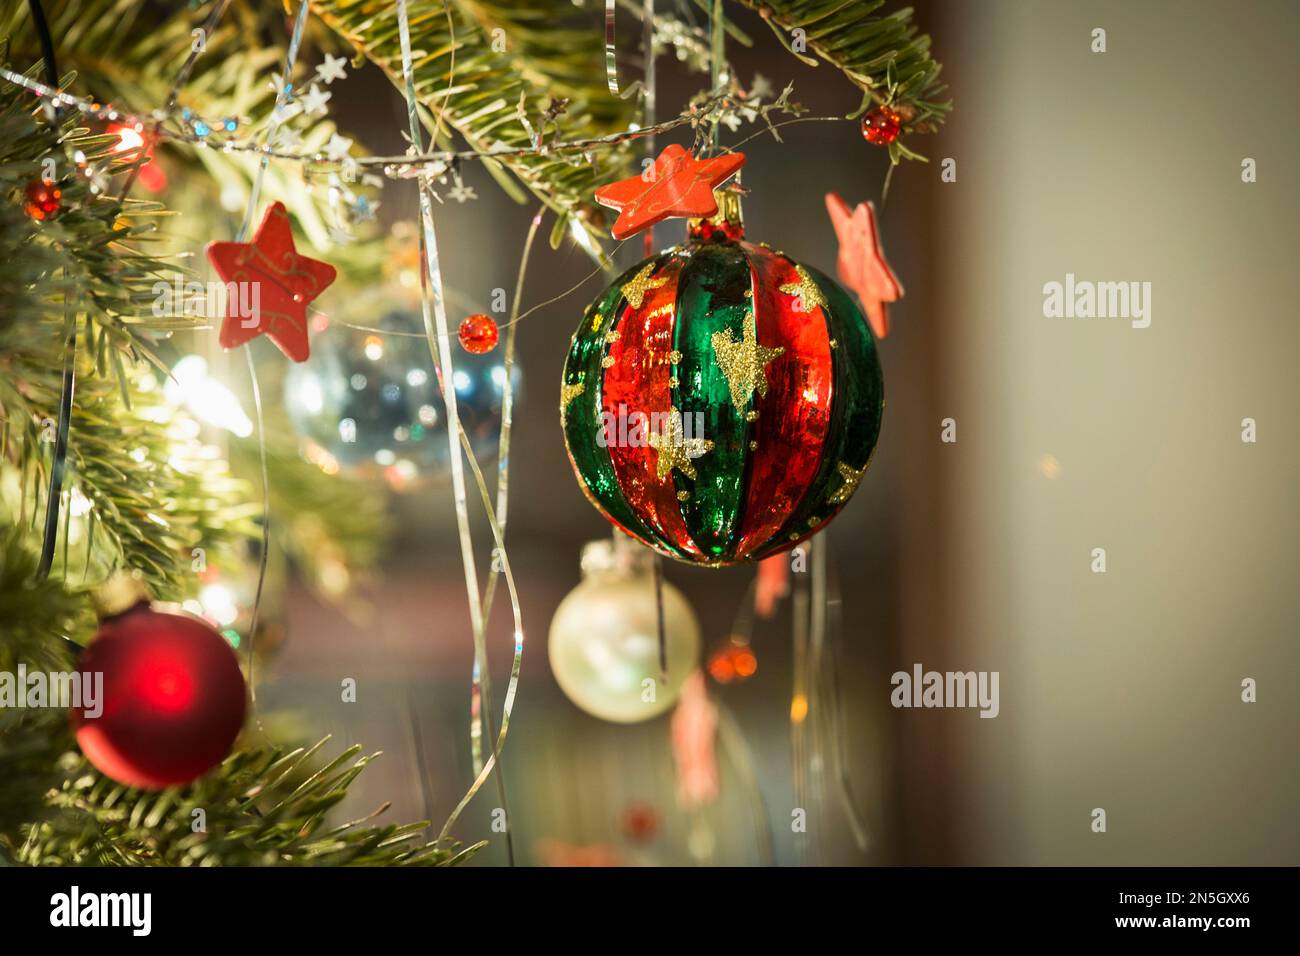 Christmas baubles hanging on Christmas tree, Munich, Germany Stock Photo